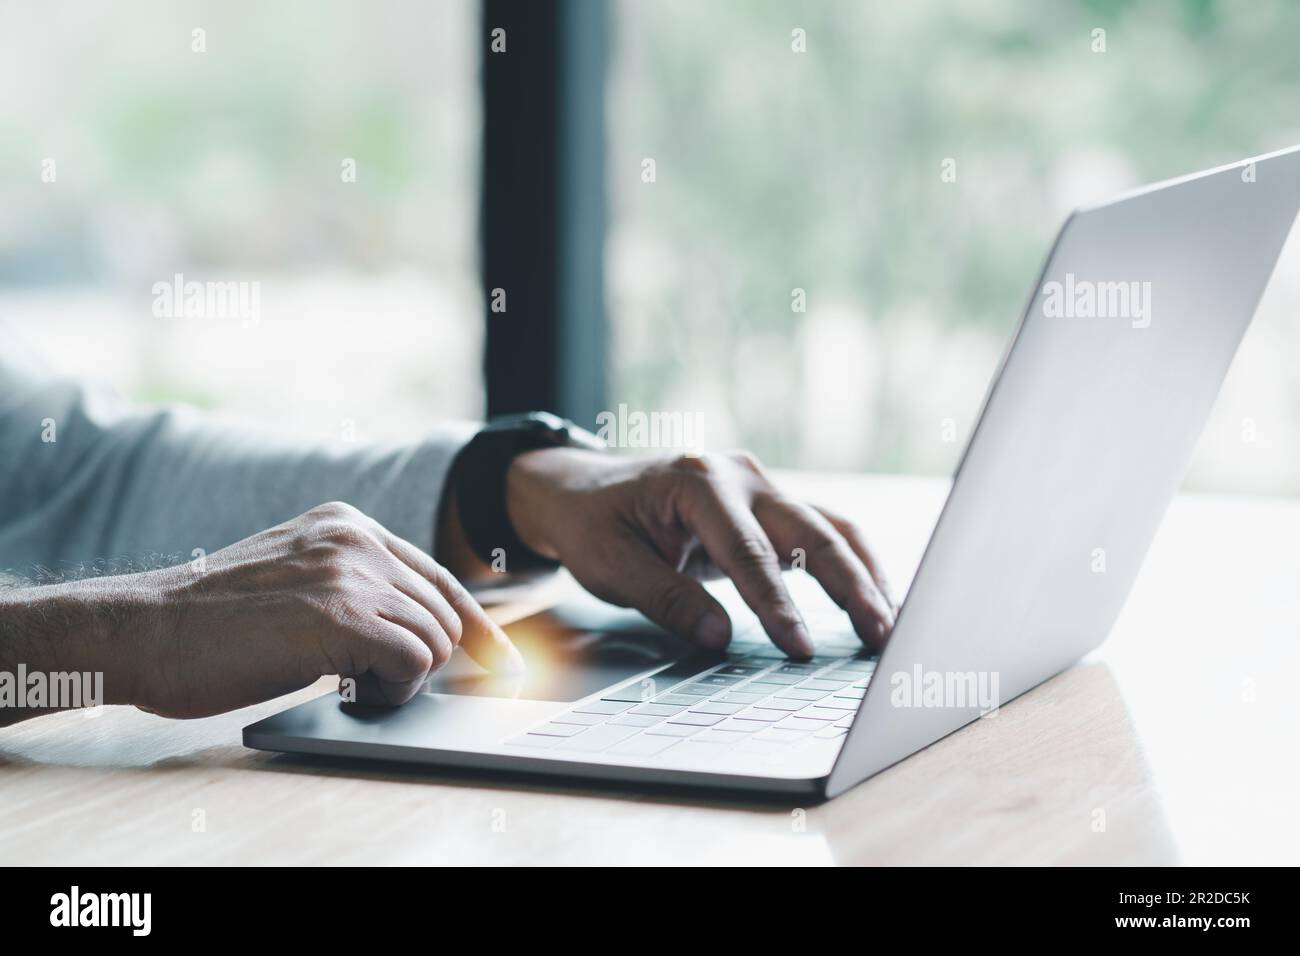 Man uses his finger to press button to turn off, closed, shut down laptop computer placed on desk, is time to finish each day before going home for sa Stock Photo